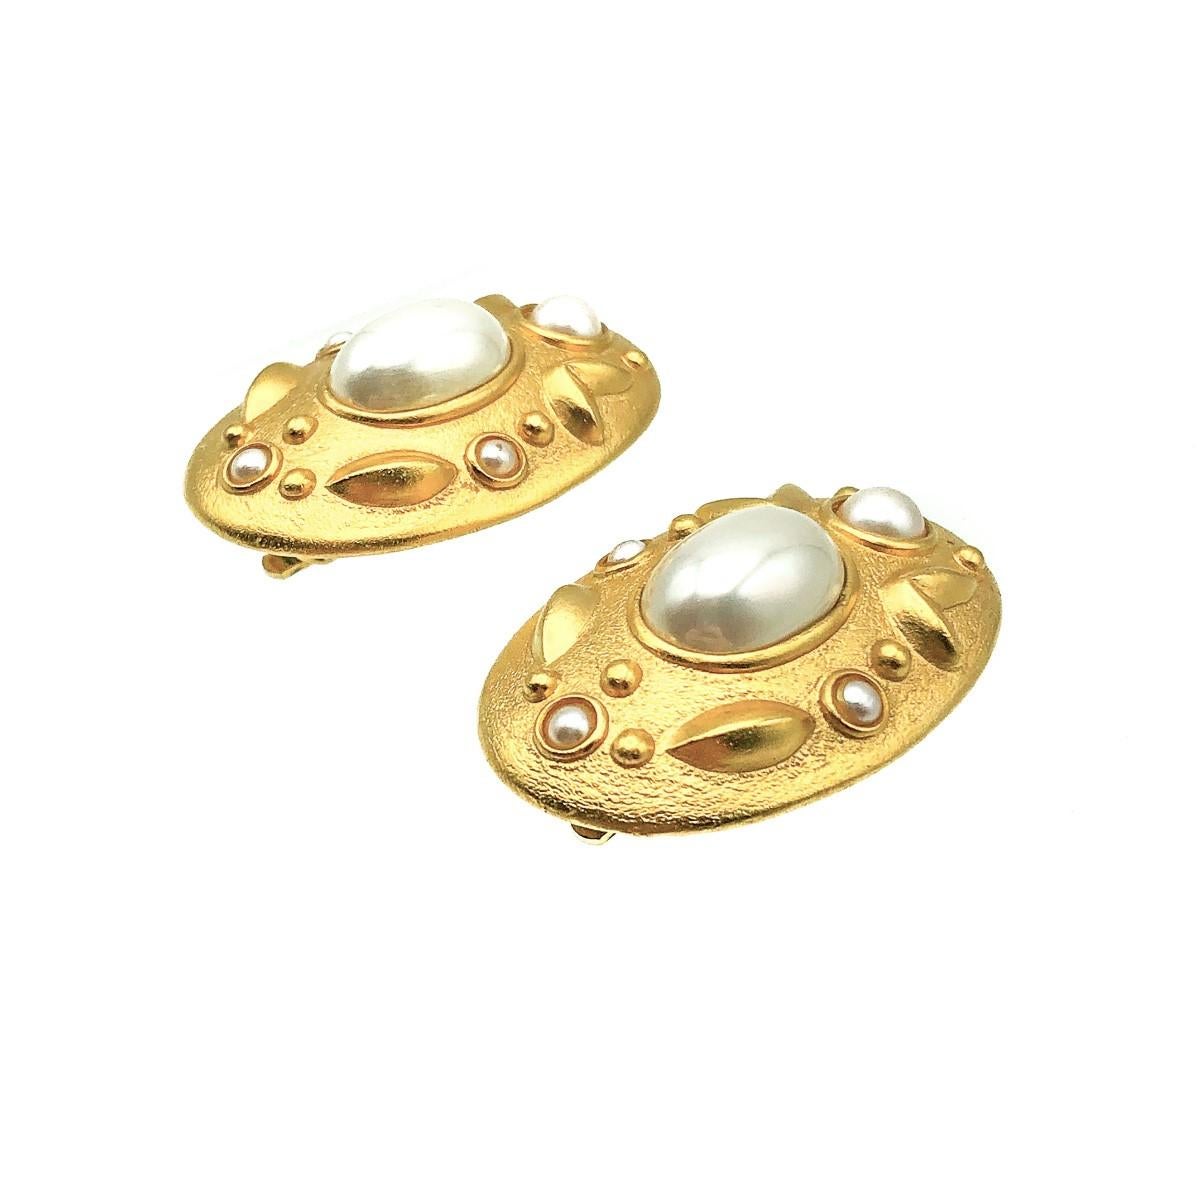 A Vintage Etruscan Pearl Earring. Crrafted in gold plated metal and set with an array of glass faux pearls. Very good vintage condition, 3.5cms. Wonderfully rich and exuberant with the contrast of the gold and pearl. Utter glam. 

Established in